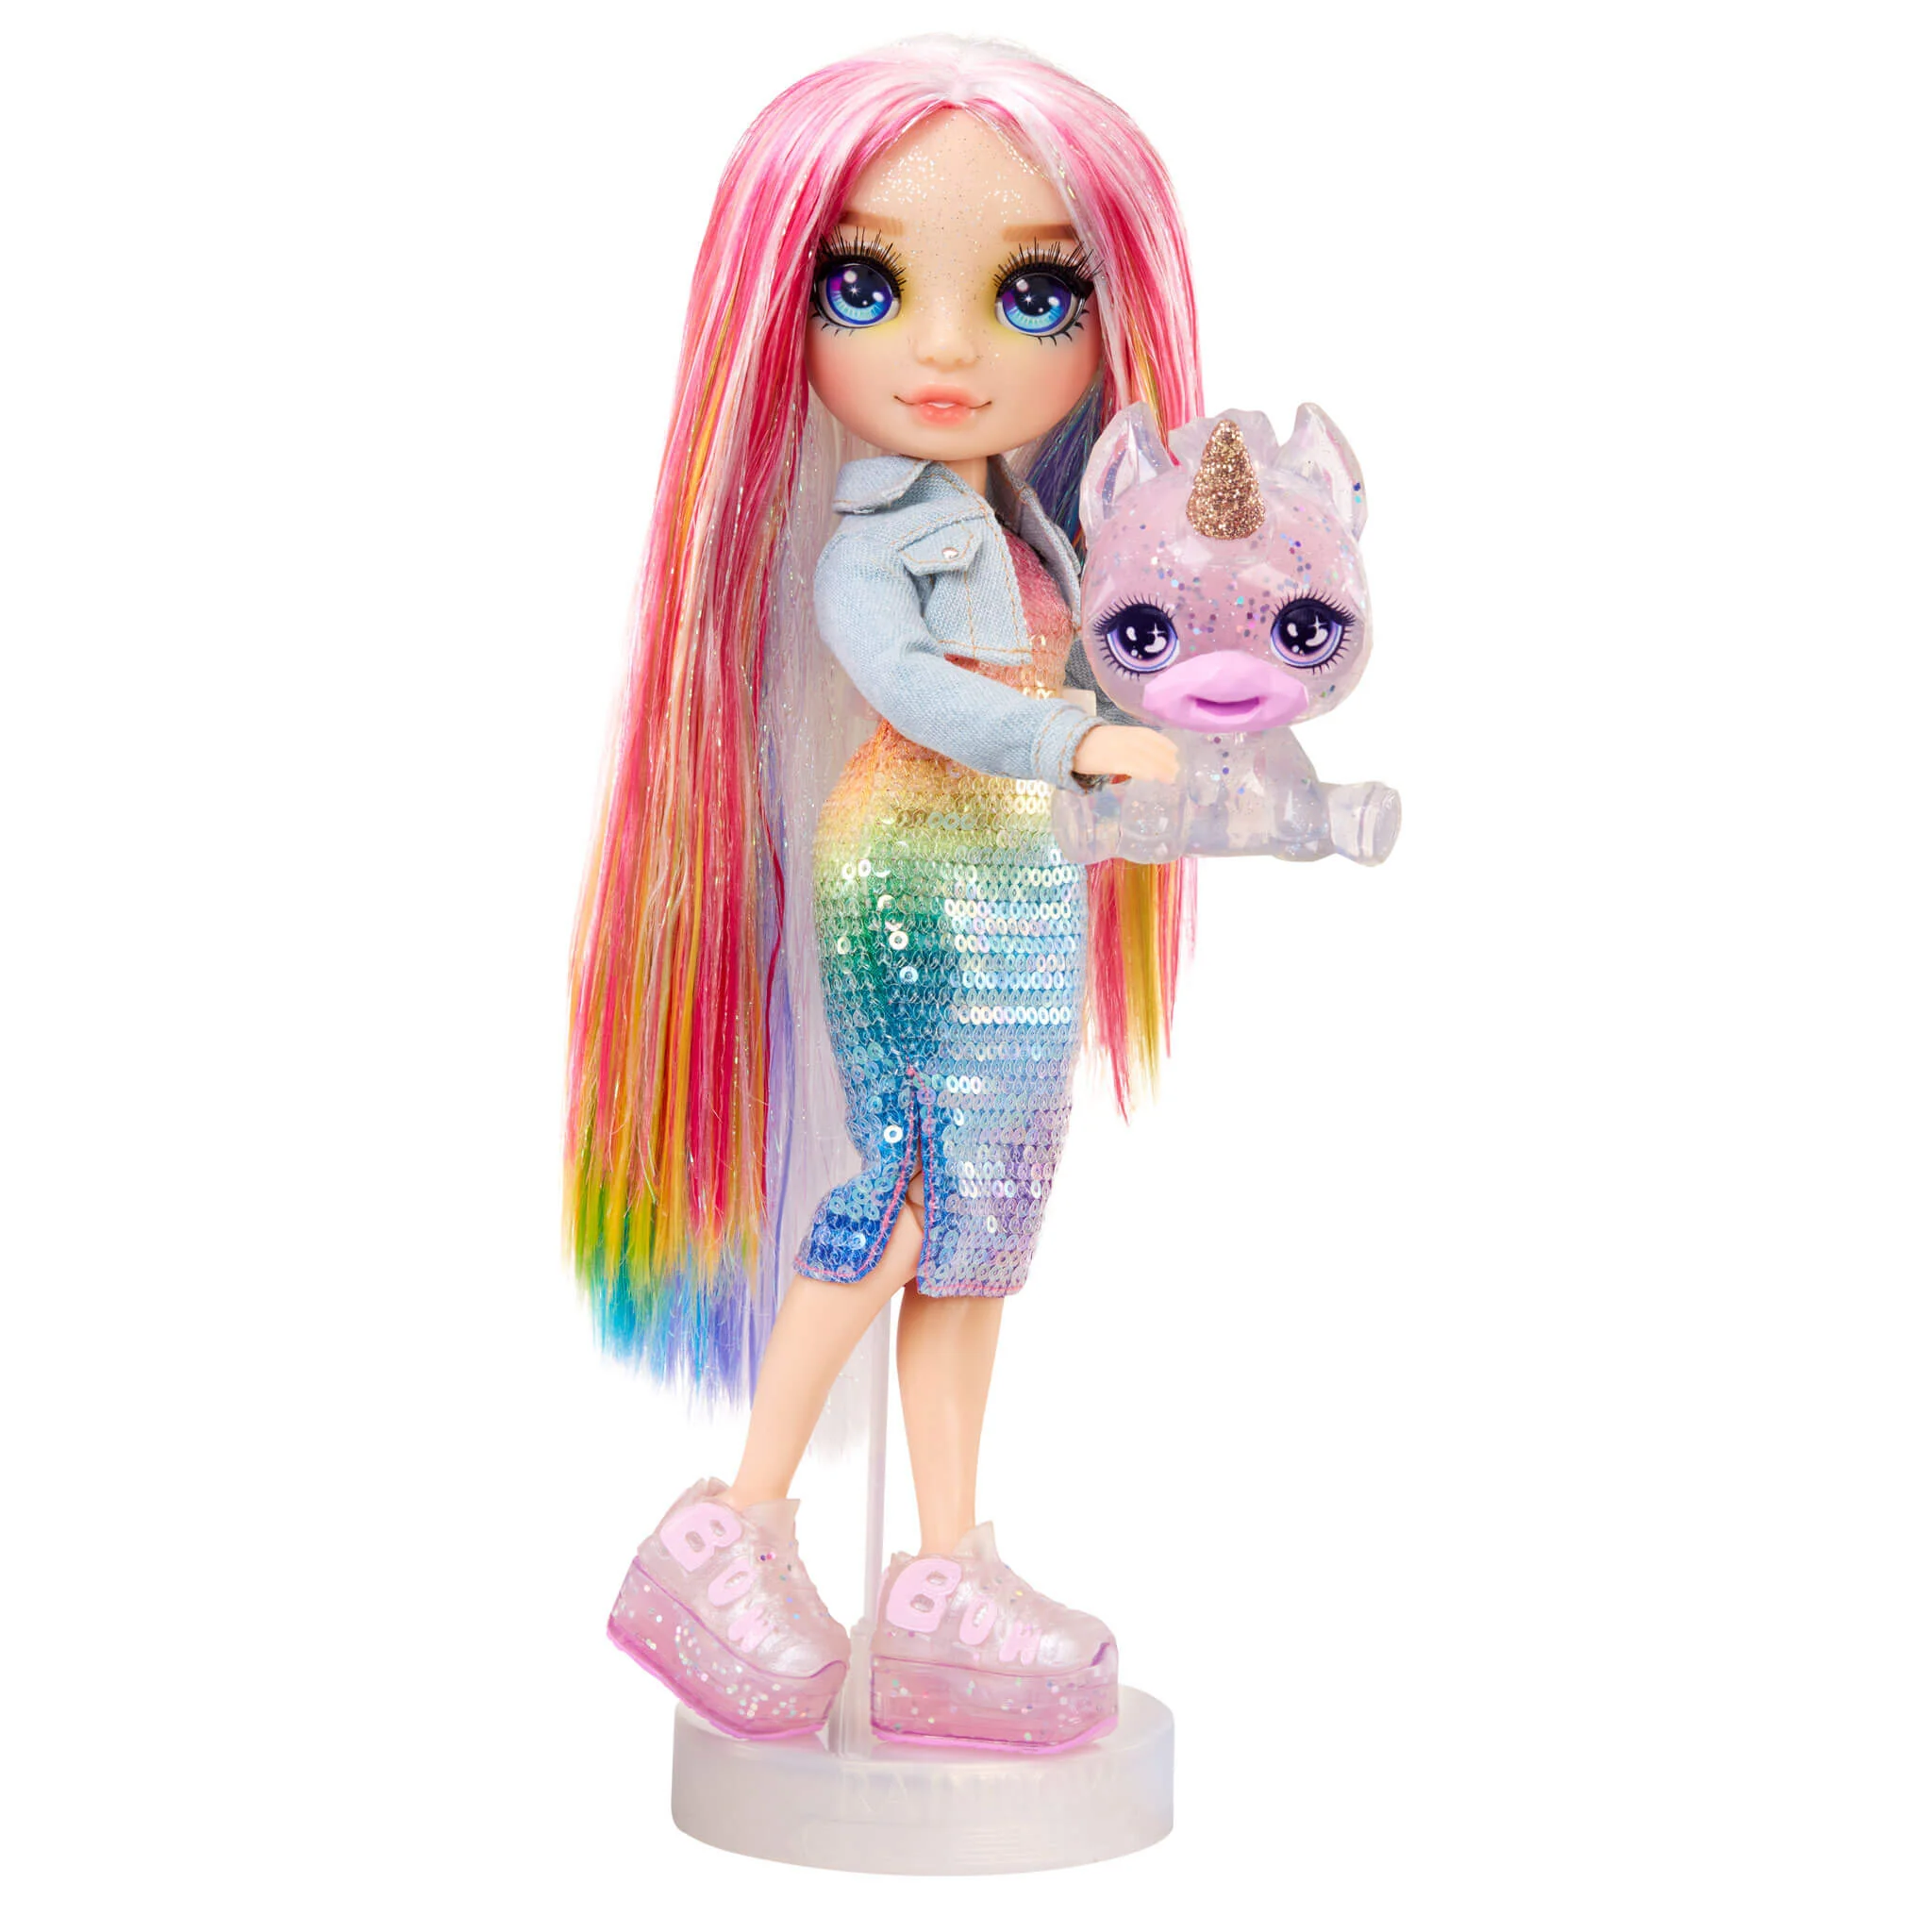 Rainbow High Sunny (Yellow) with Slime Kit & Pet - Yellow 11” Shimmer Doll  with DIY Sparkle Slime, Magical Yeti Pet and Fashion Accessories